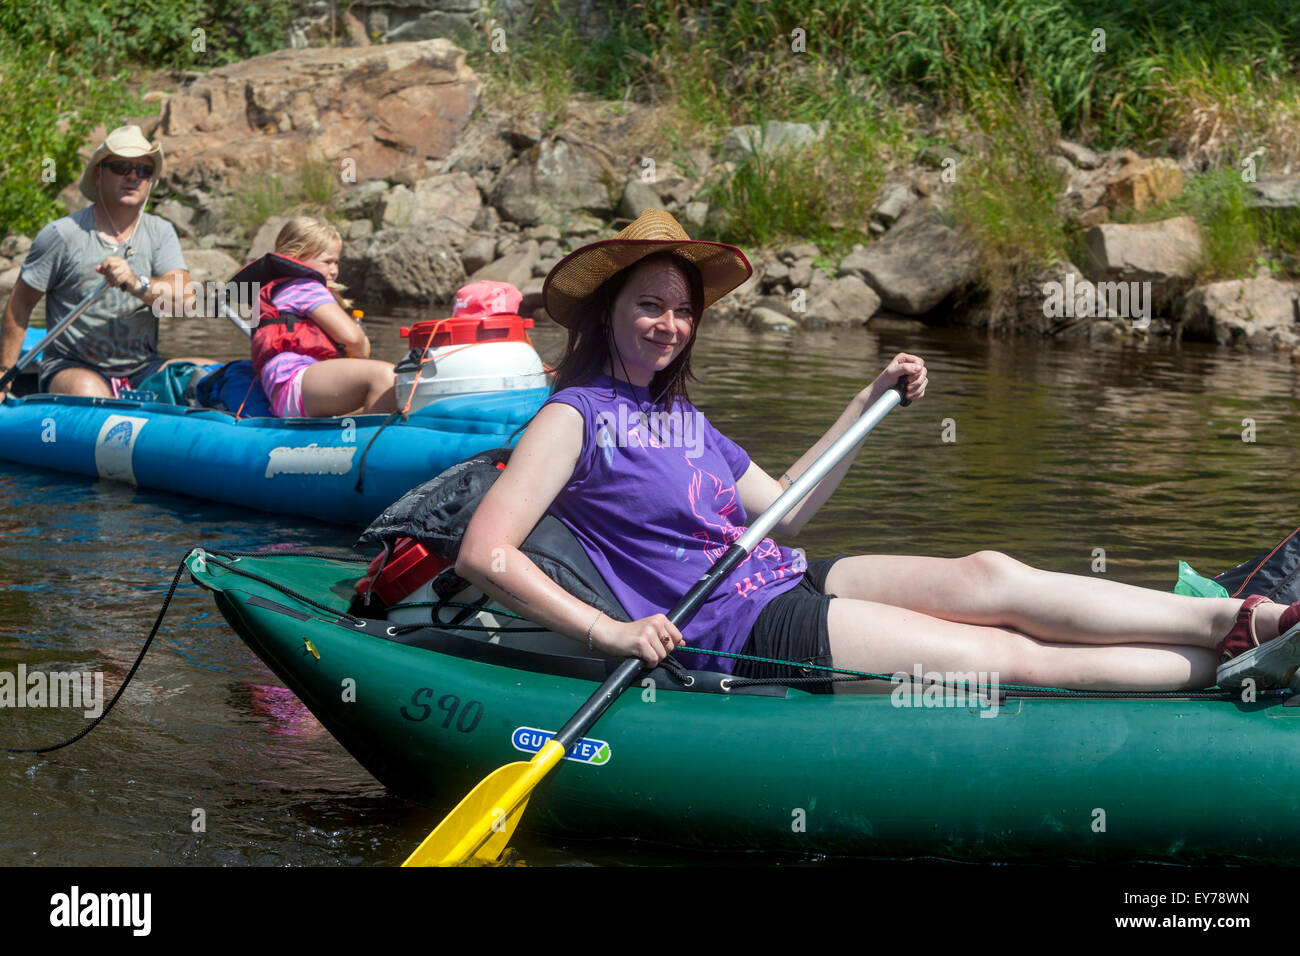 People Woman going down the river Vltava, rafting, South Bohemia, Czech Republic Stock Photo